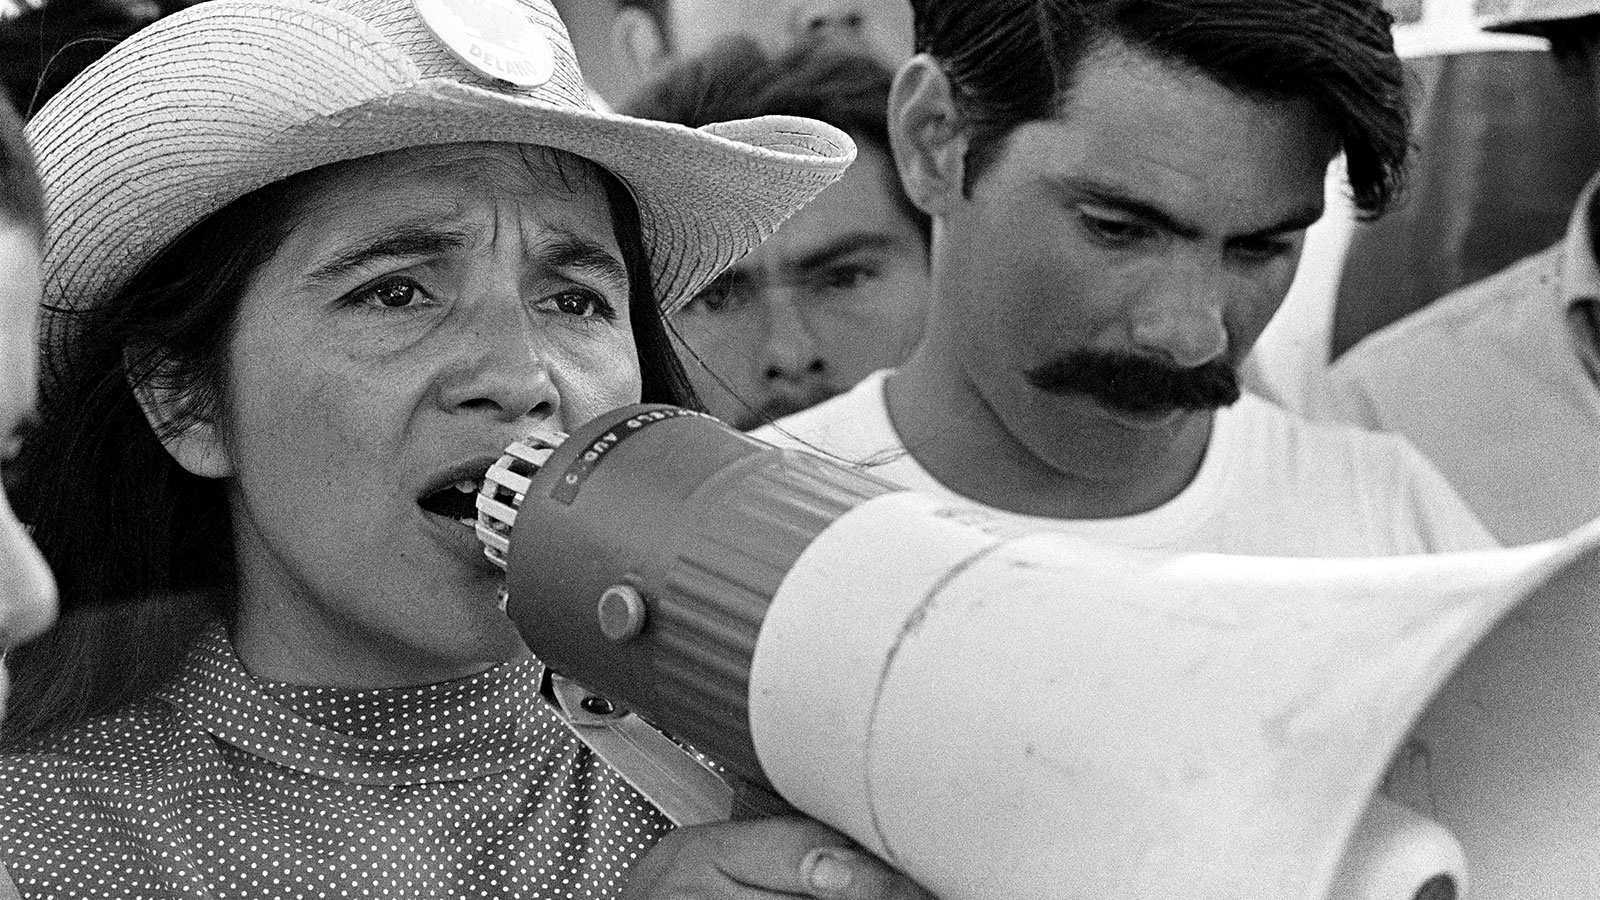 Black and white image of Dolores Huerta speaking into a megaphone.